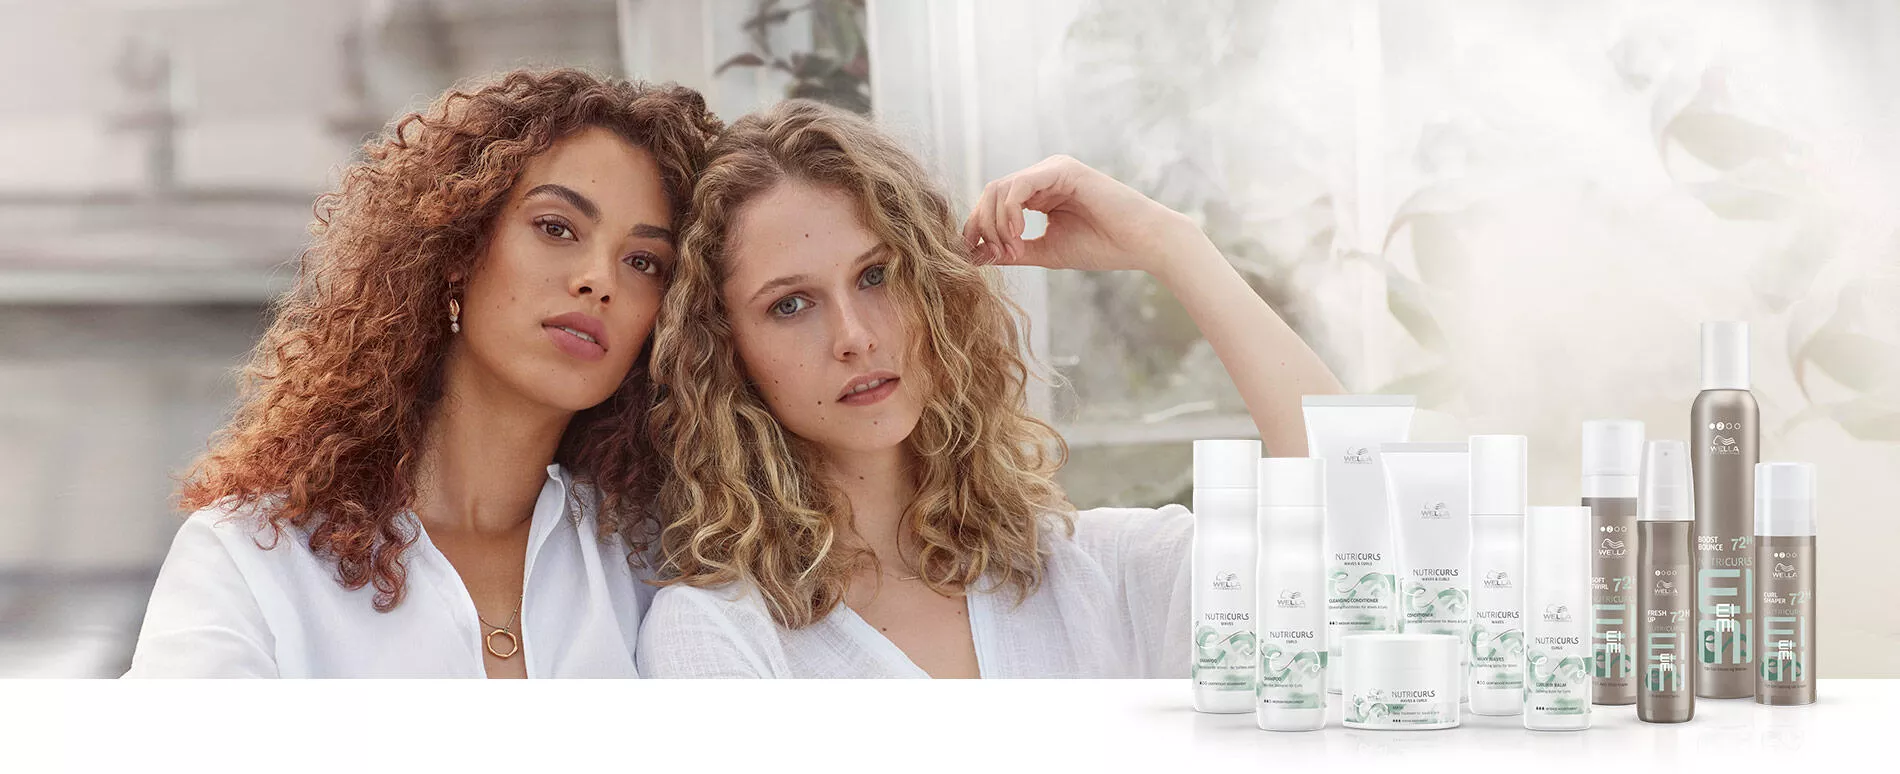 Two women with shoulder-length corkscrew curls in white clothes, sitting together, plus NUTRICURLS product bottles